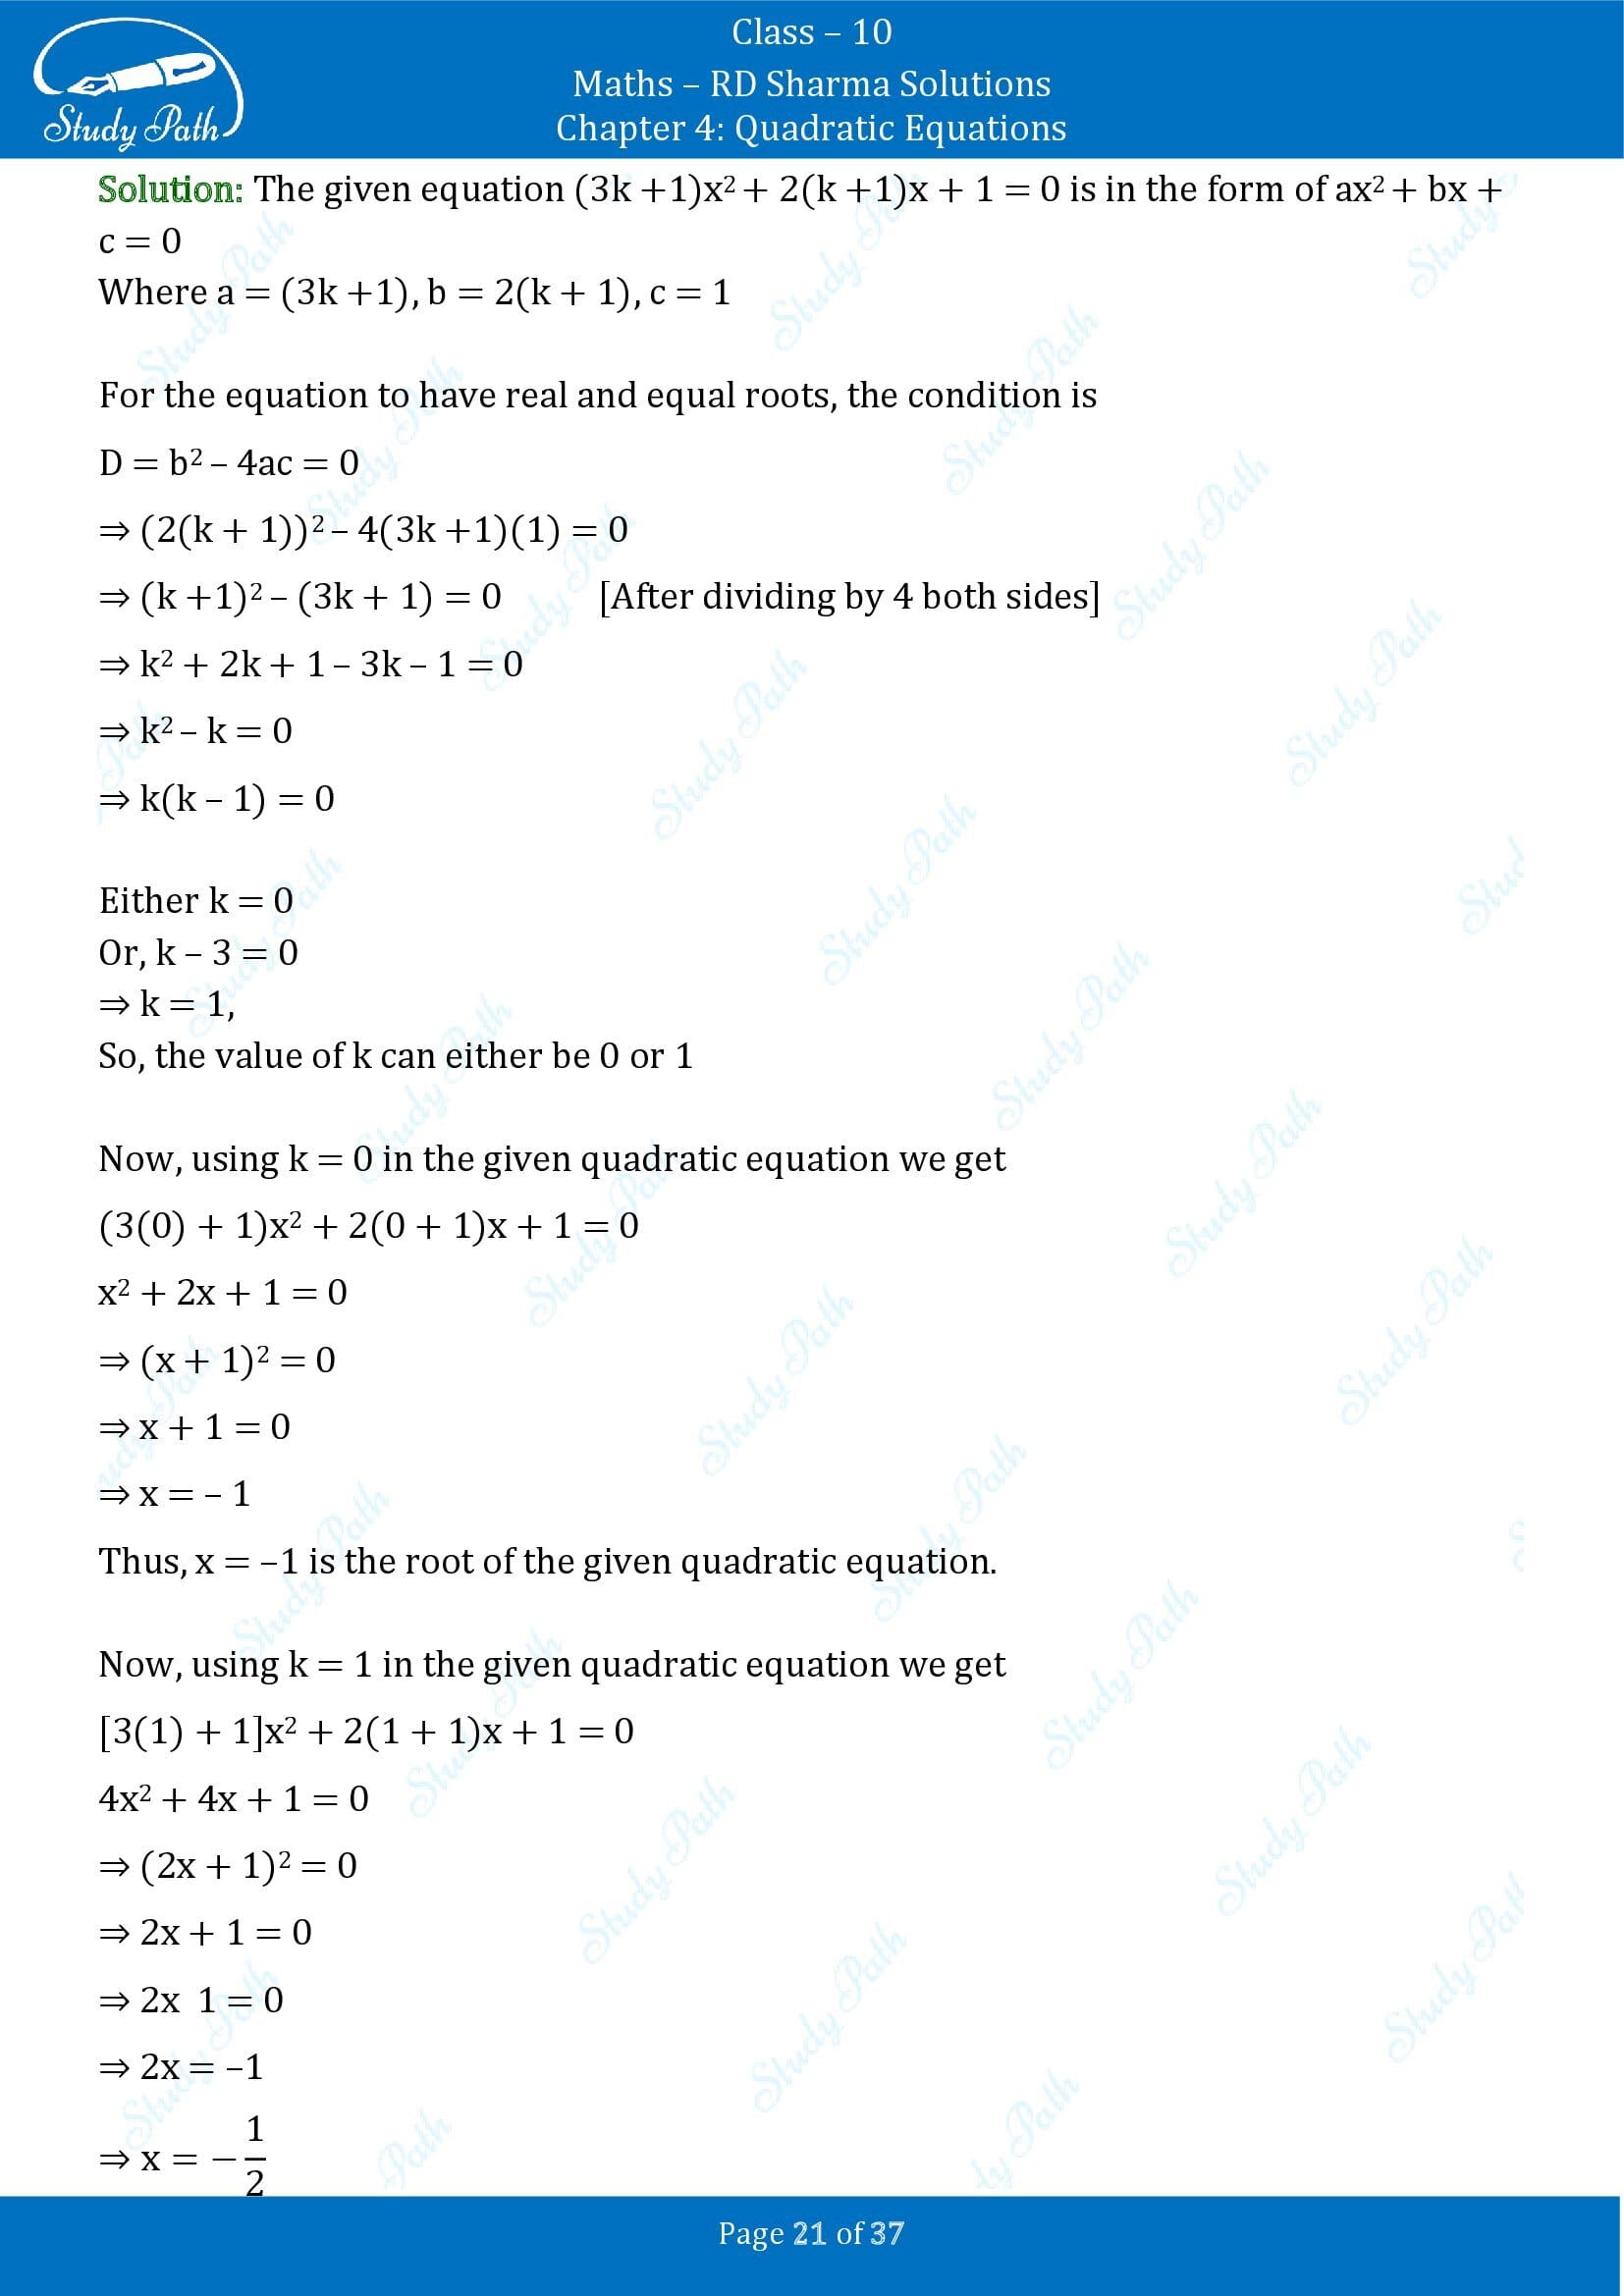 RD Sharma Solutions Class 10 Chapter 4 Quadratic Equations Exercise 4.6 00021